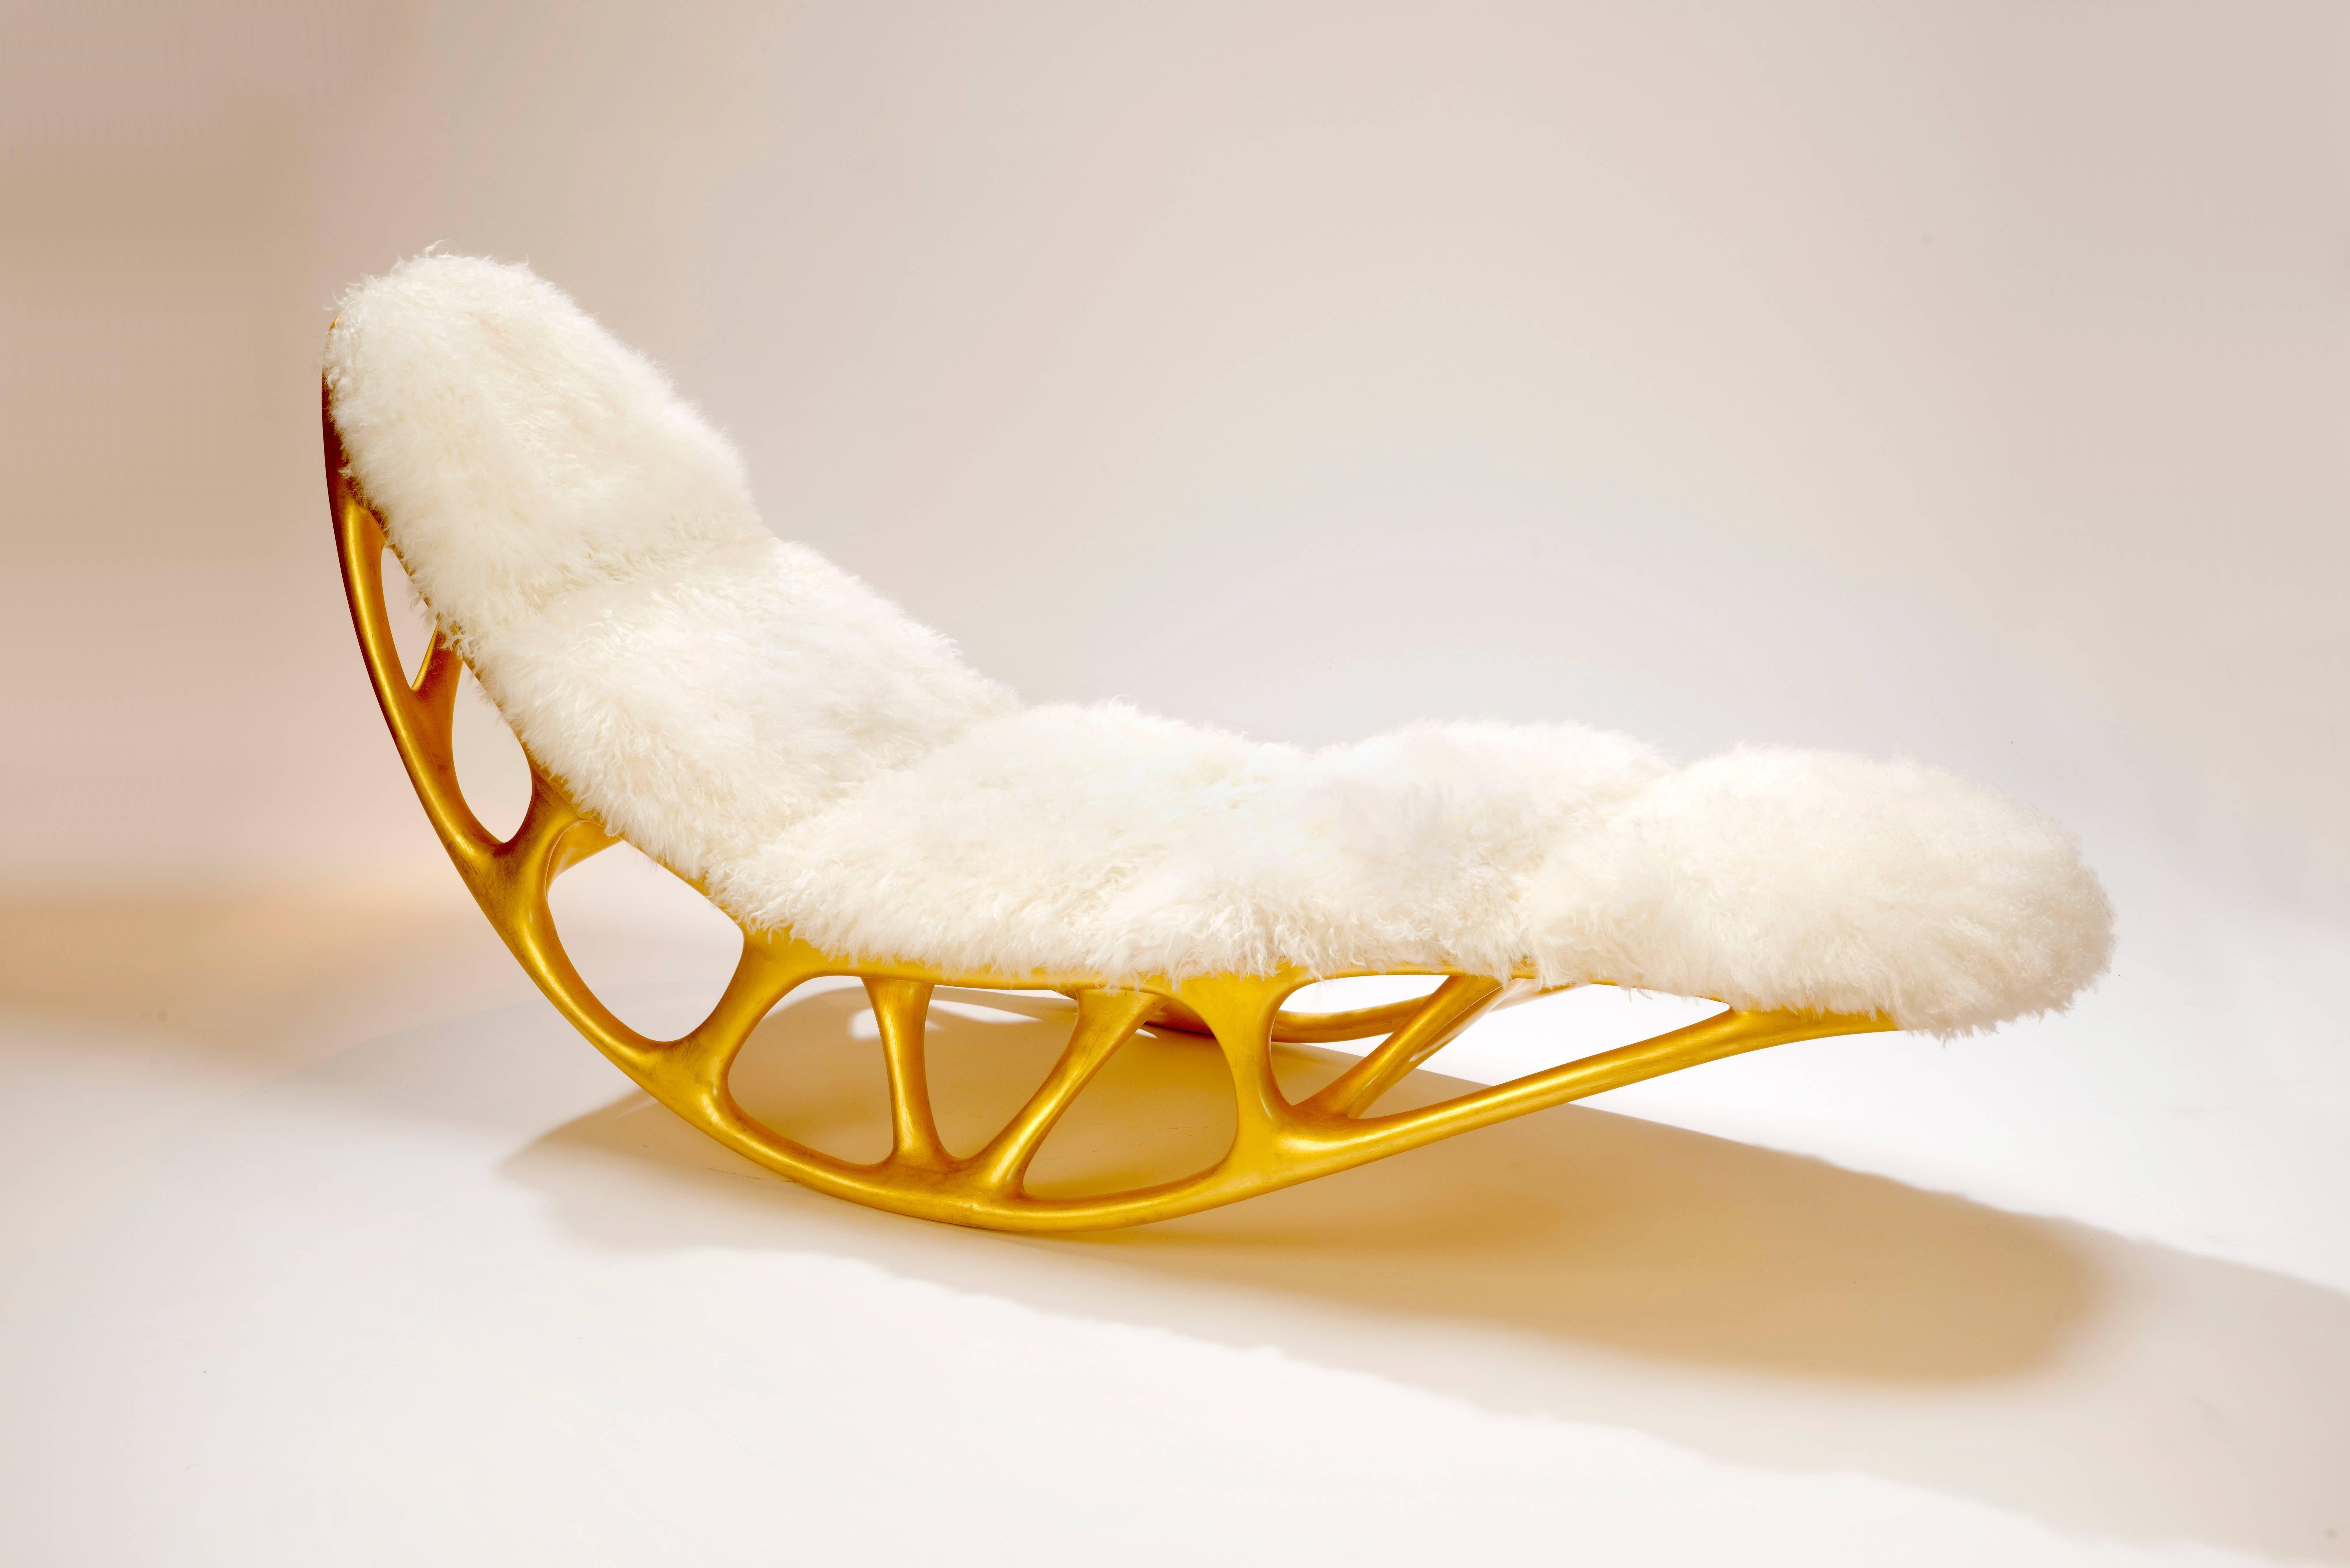 Timothy Schreiber fabricated Morphogenesis Chaise out of gilded fiberglass and Mongolian Lamb Skin.

Timothy Schreiber initially trained in cabinet making in Germany before studying architecture and design in Germany and England, and has worked with